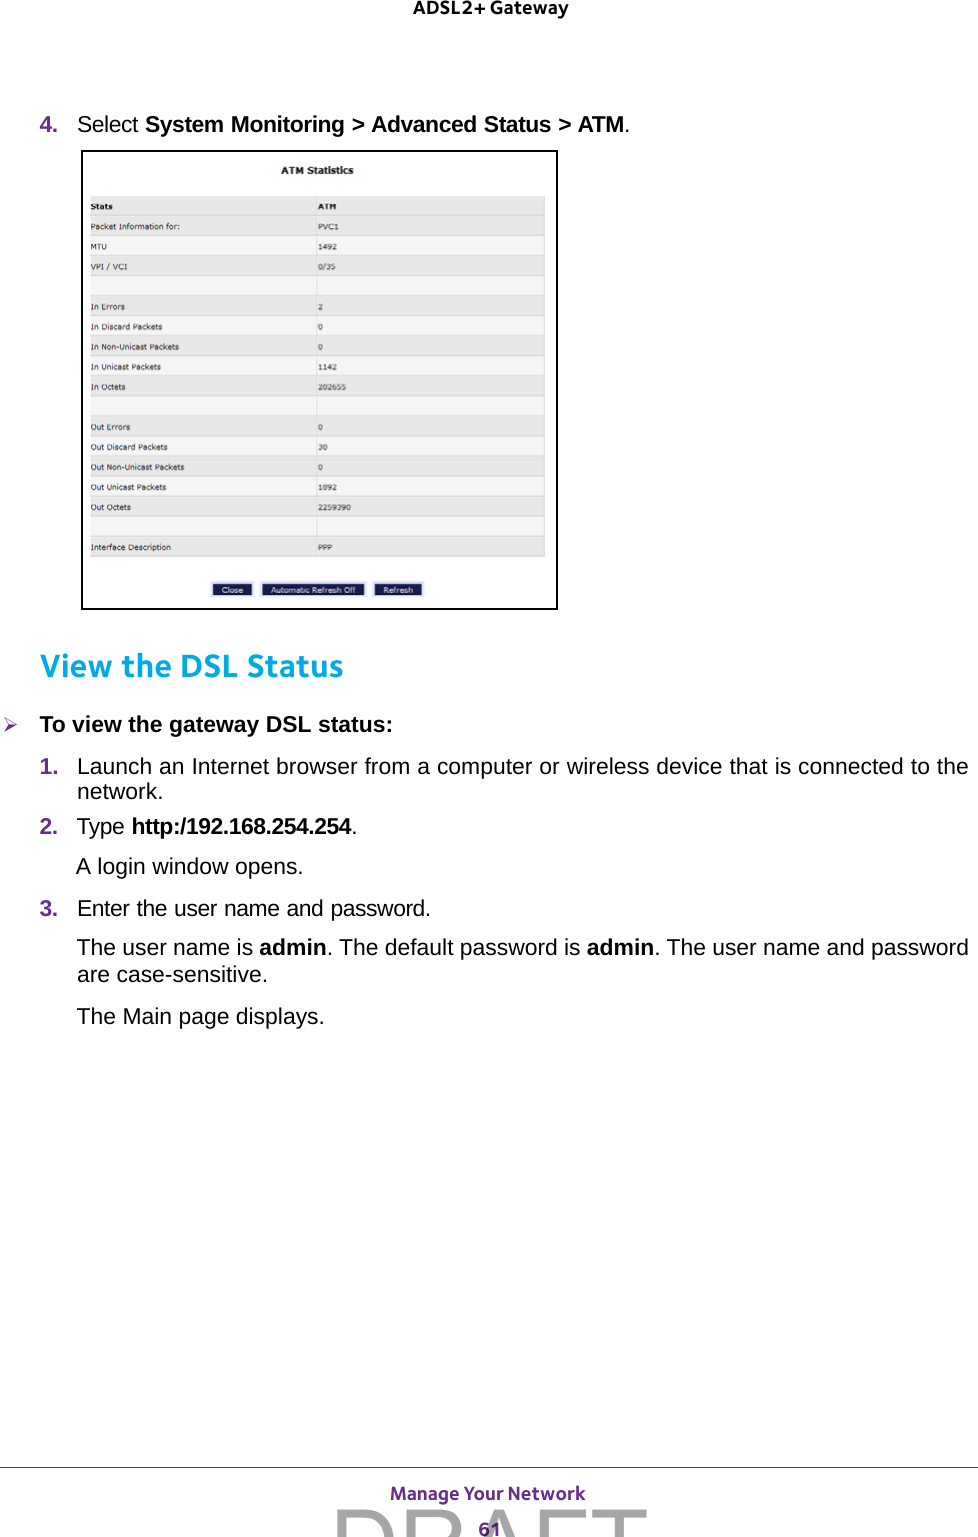 Manage Your Network 61 ADSL2+ Gateway4.  Select System Monitoring &gt; Advanced Status &gt; ATM. View the DSL StatusTo view the gateway DSL status:1.  Launch an Internet browser from a computer or wireless device that is connected to the network.2.  Type http:/192.168.254.254.A login window opens.3.  Enter the user name and password.The user name is admin. The default password is admin. The user name and password are case-sensitive.The Main page displays.DRAFT